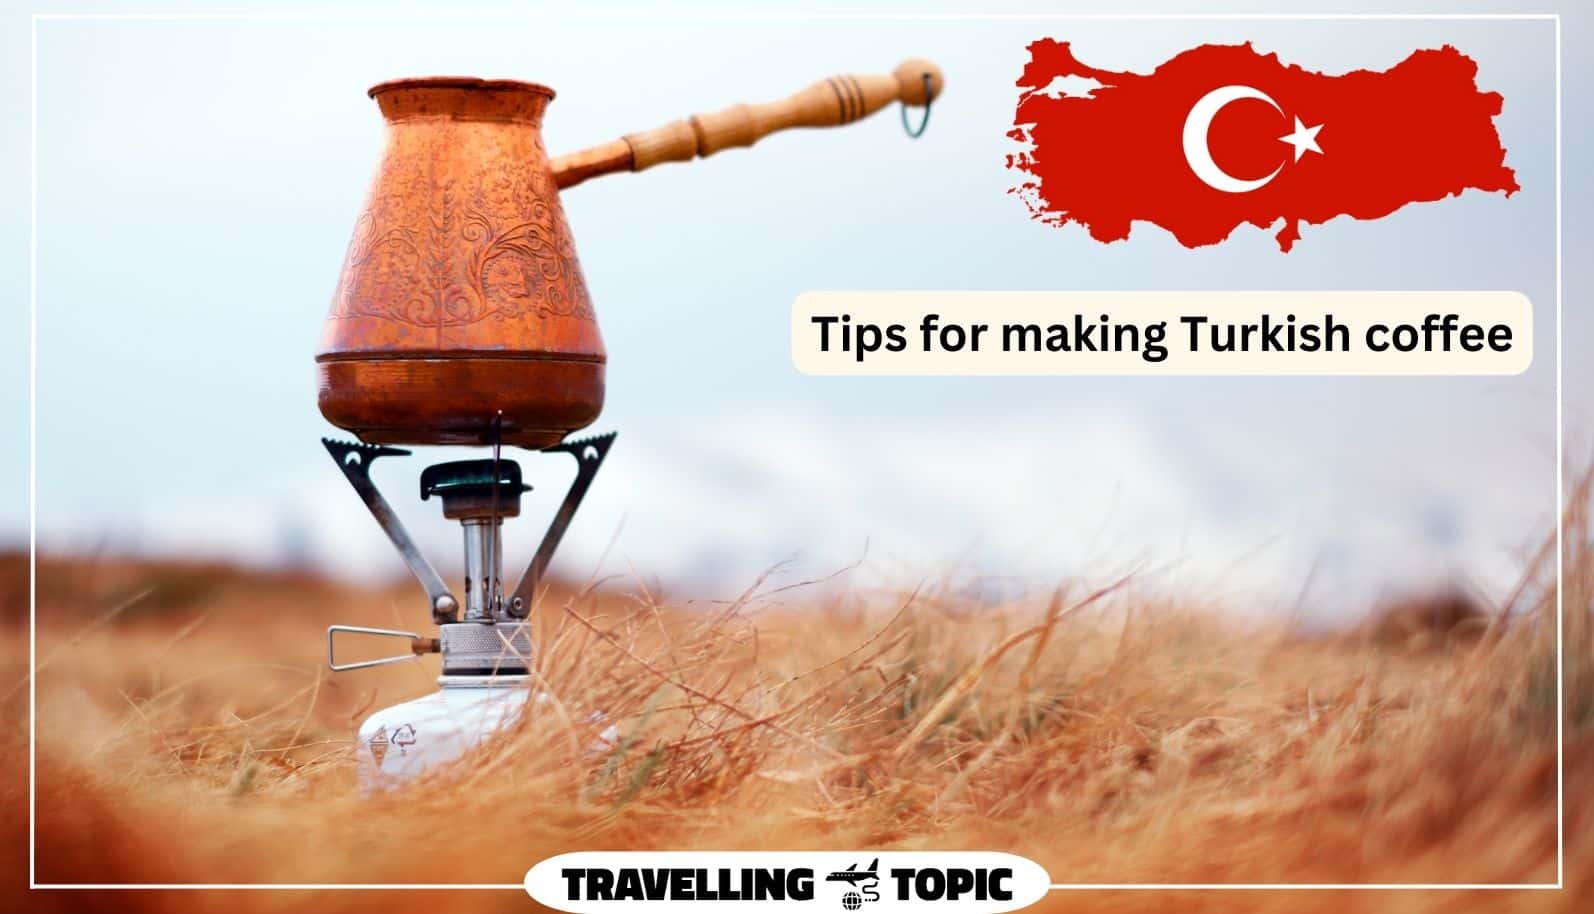 Tips for making Turkish coffee